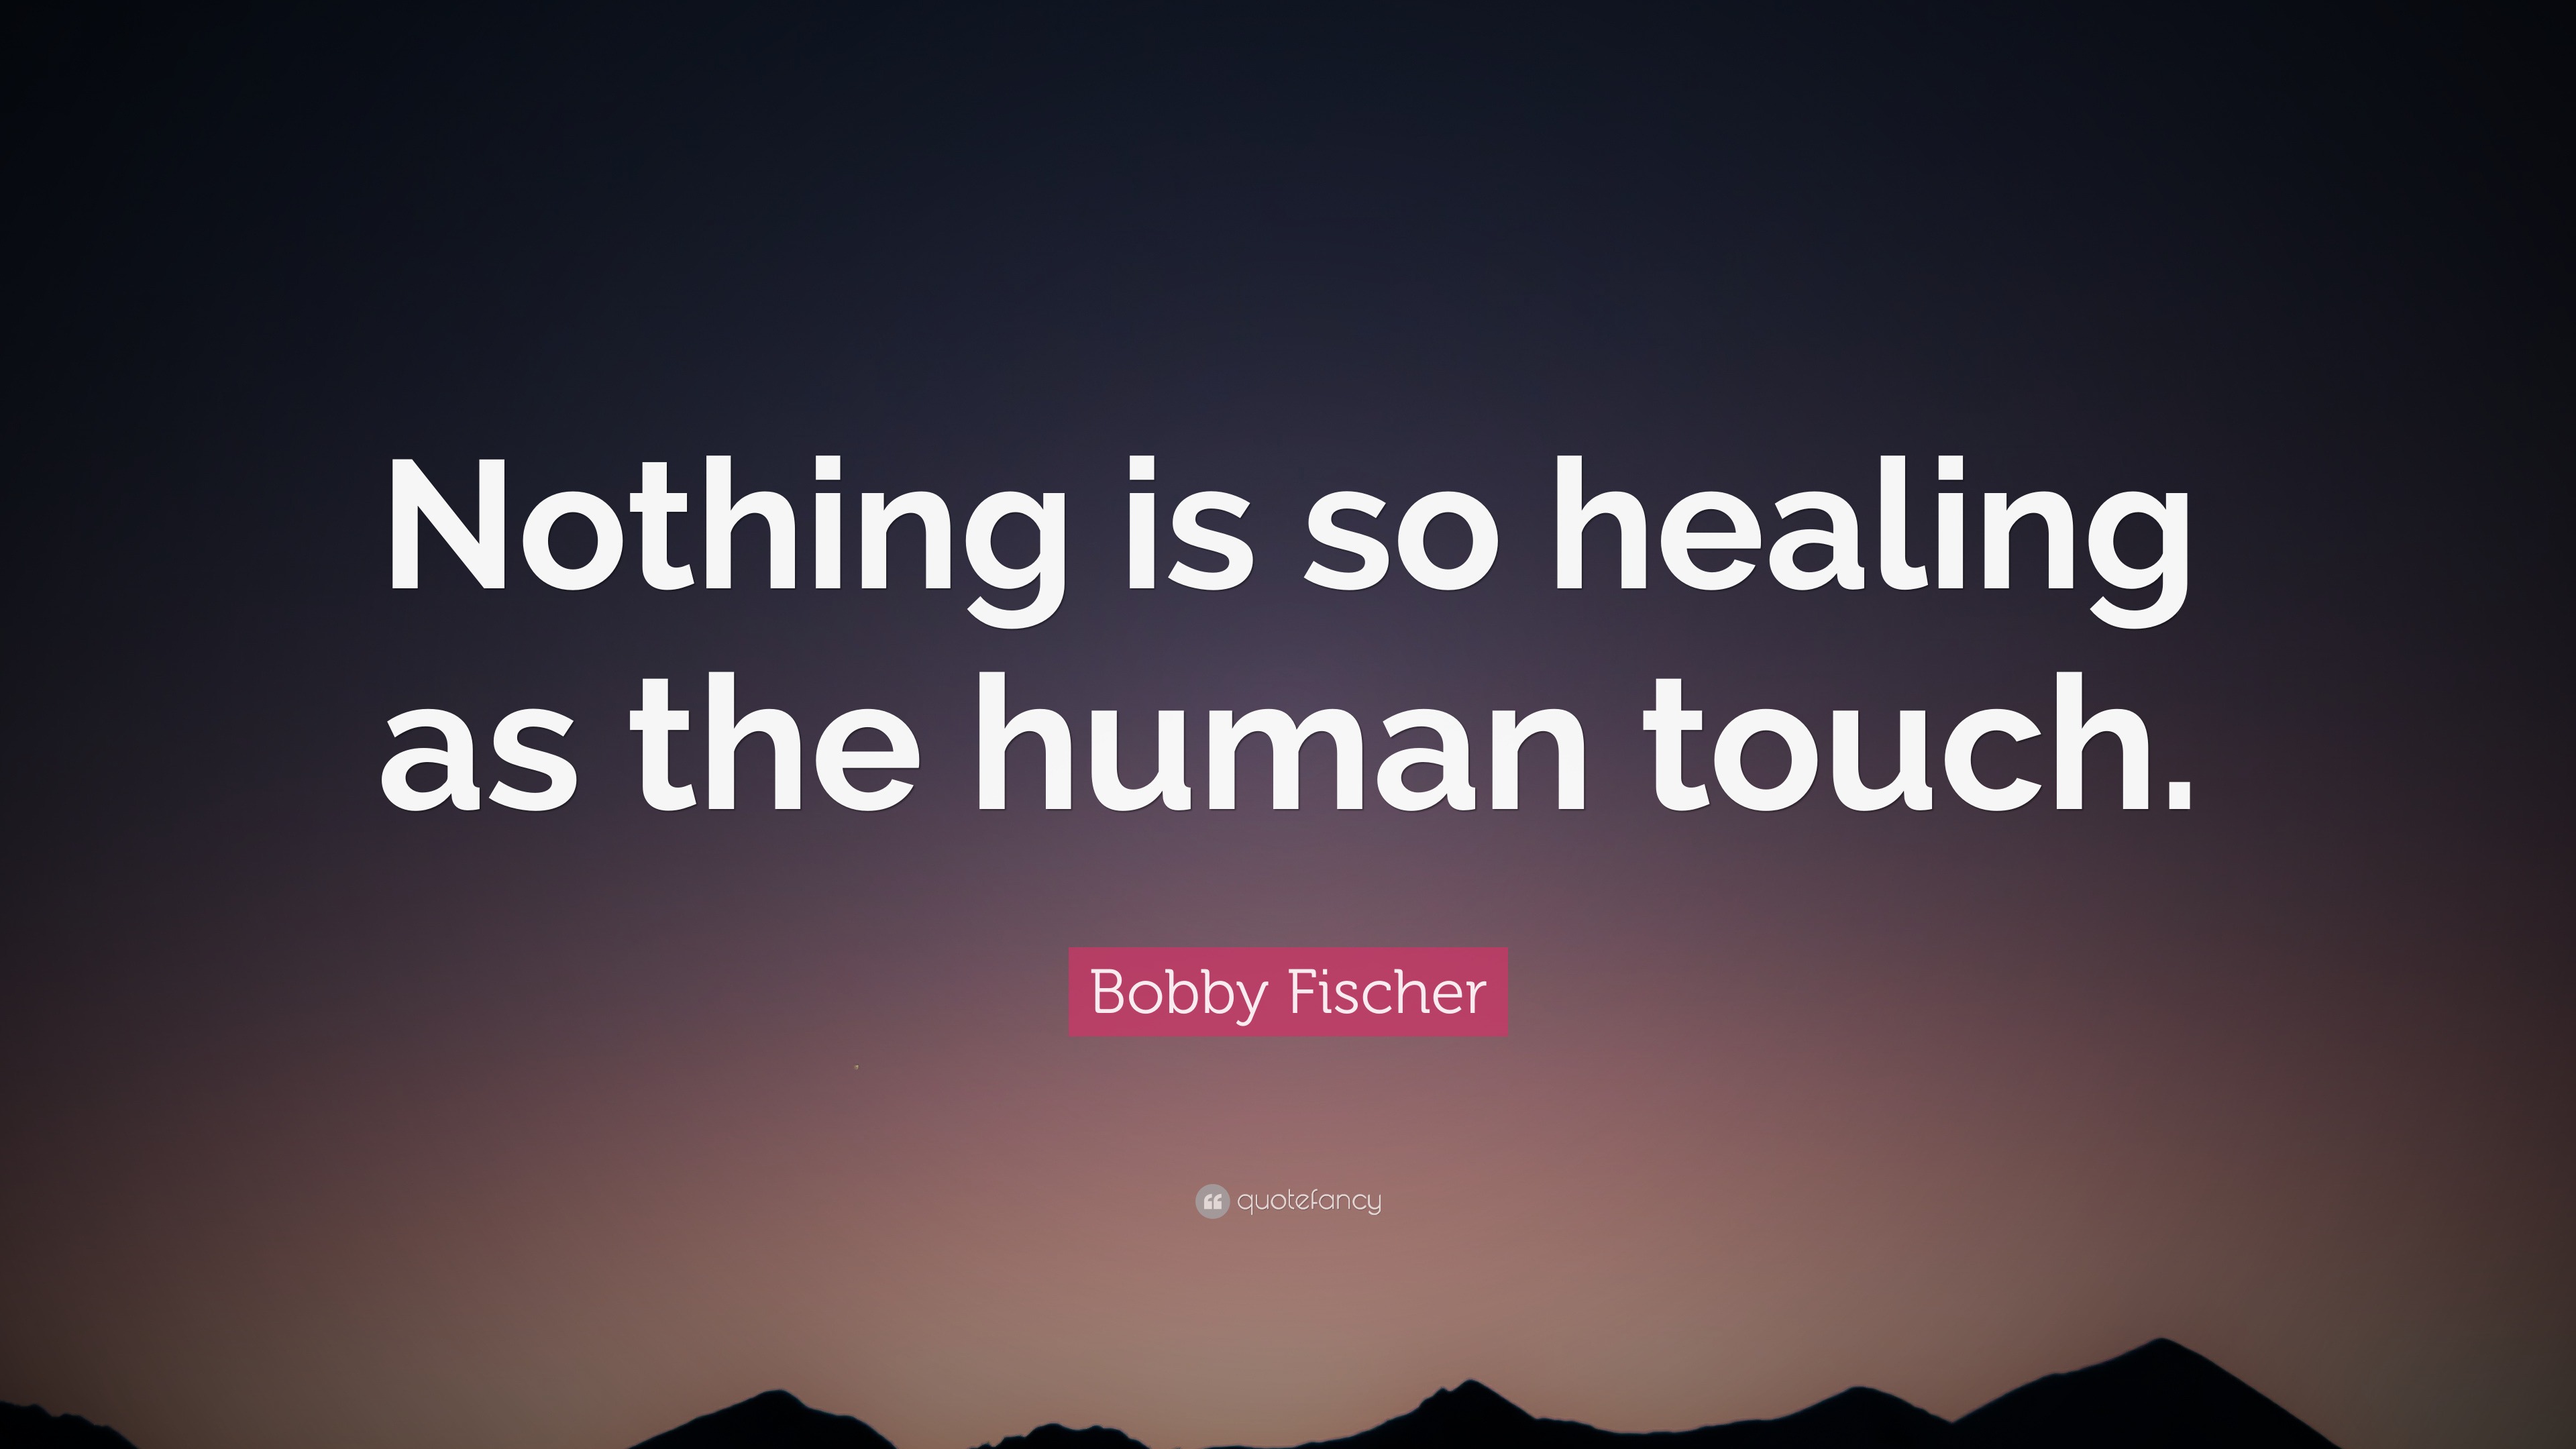 Bobby Fischer Quote: “Nothing is so healing as the human touch.”